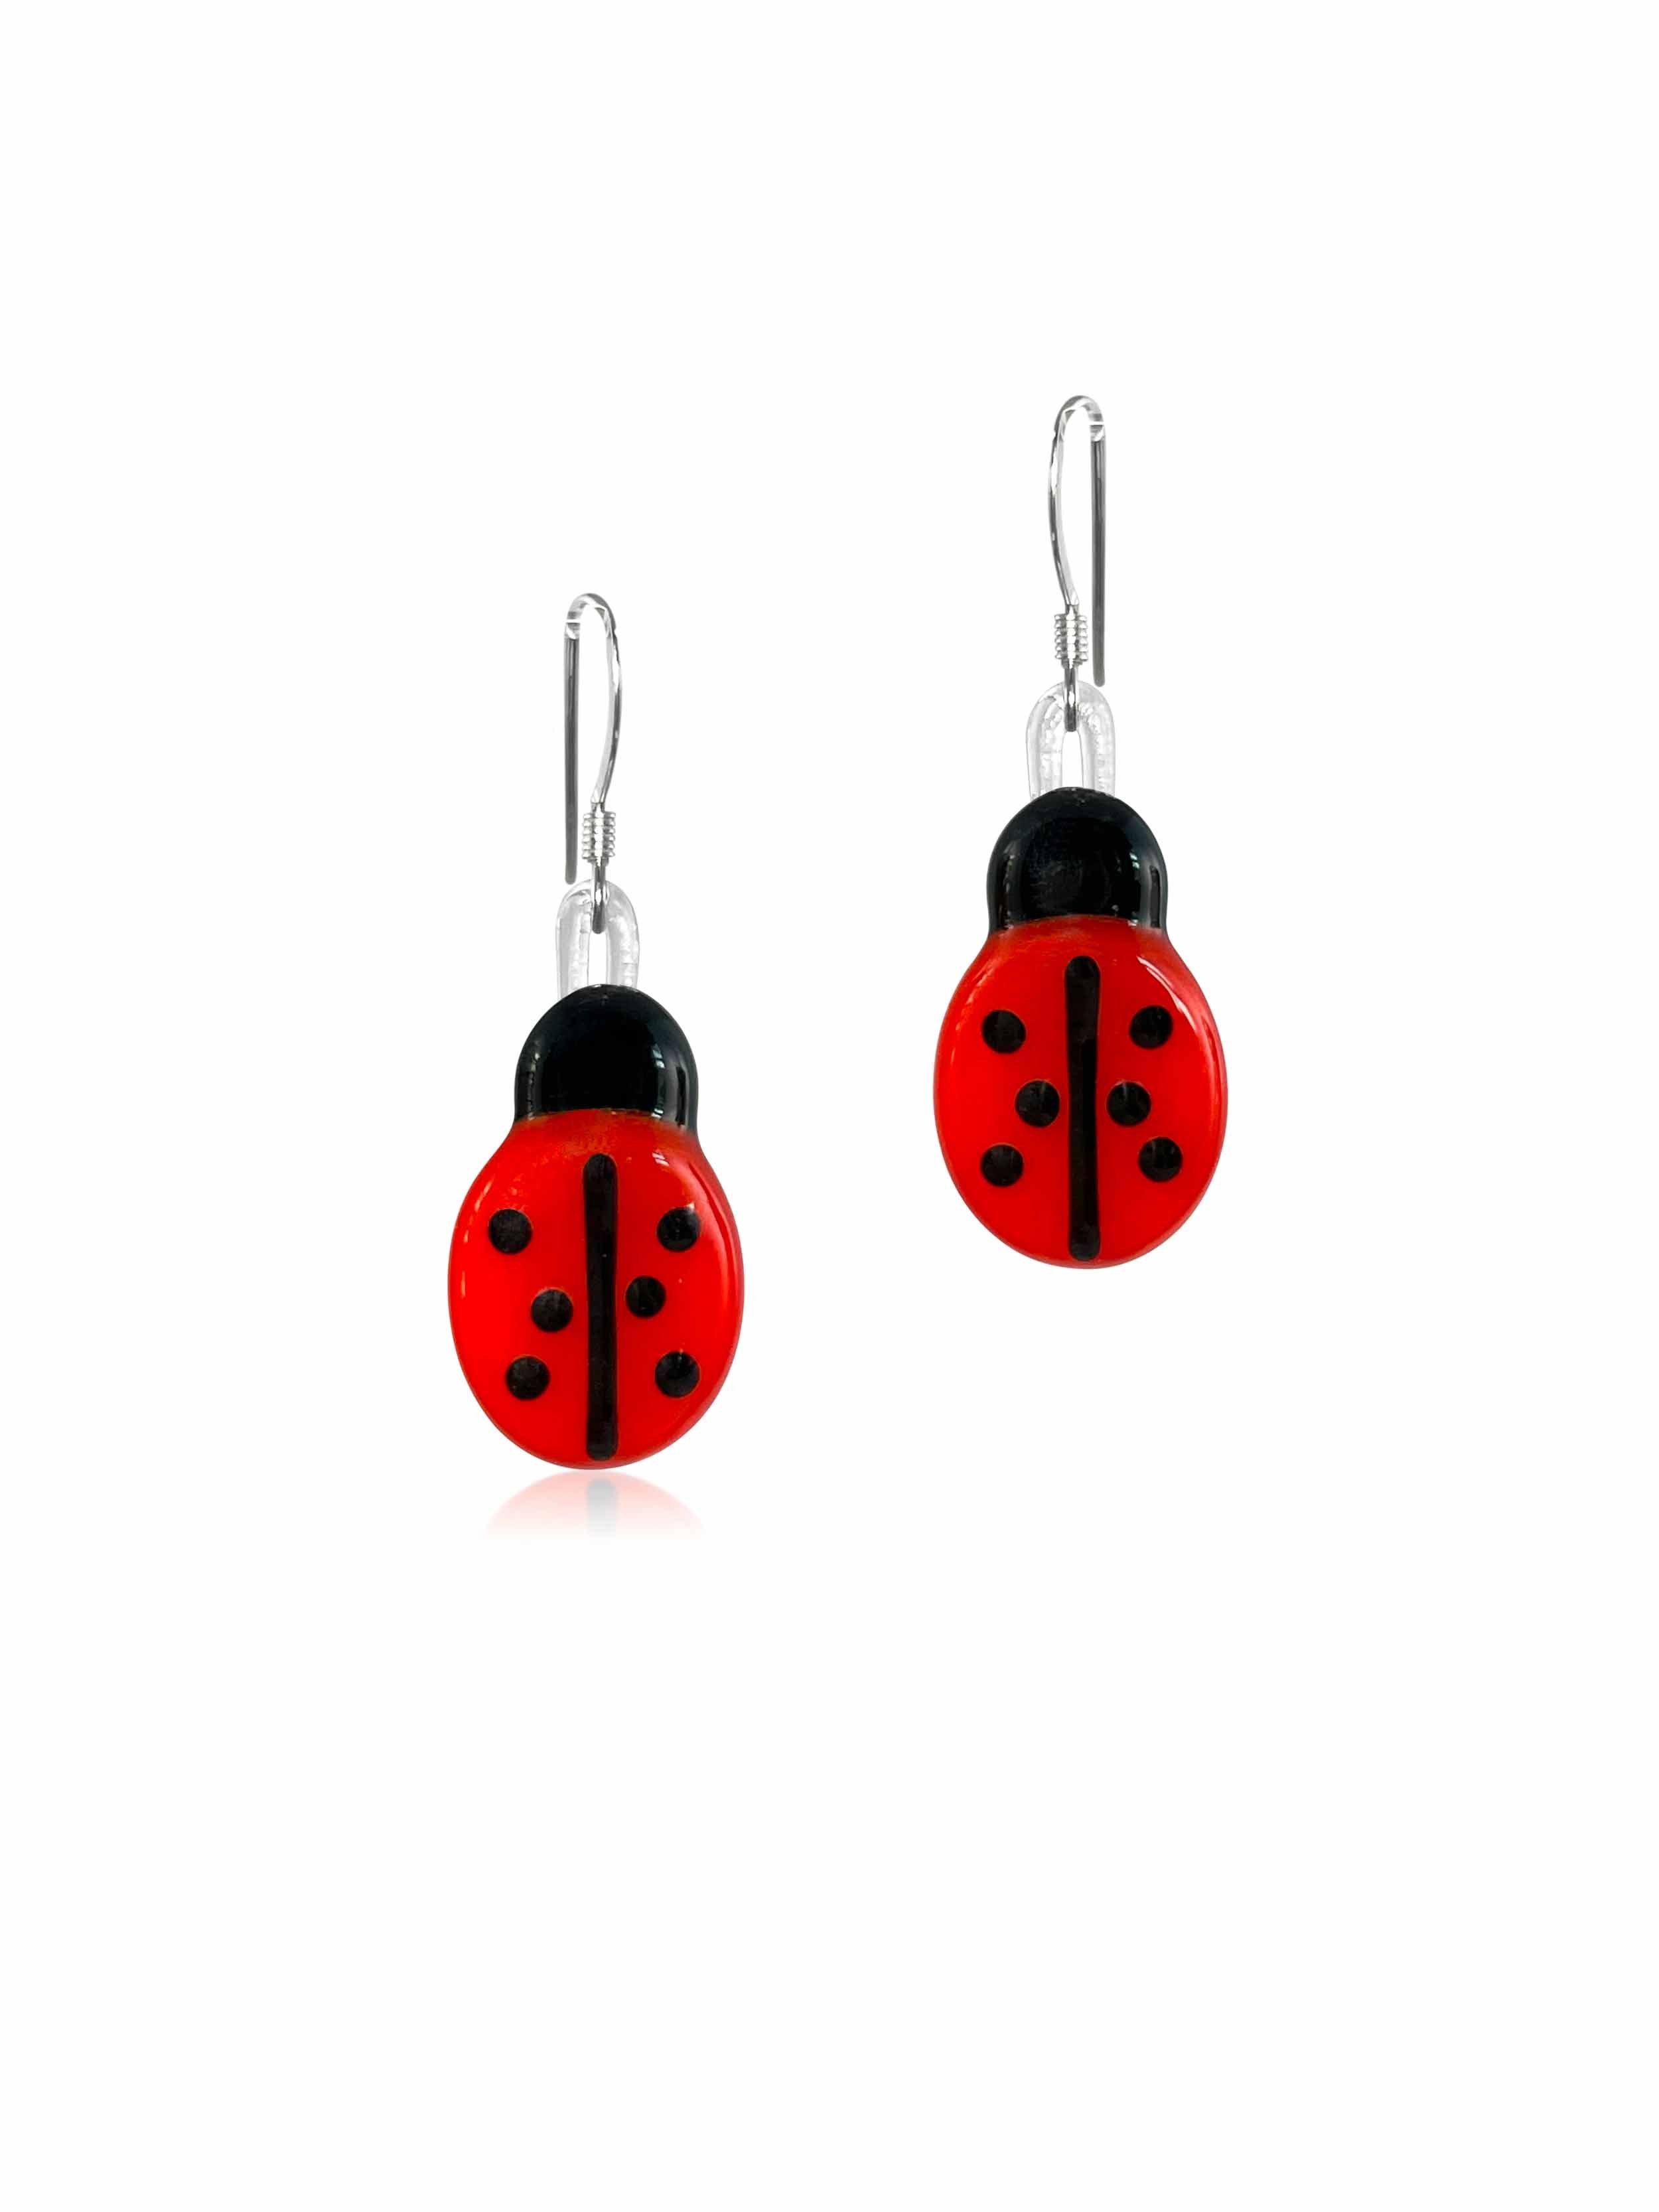 Mariechristine PAVONE Boucles Doreilles Coccinelle Ronde  Etsy  Etsy  Wedding jewelry earrings Handmade